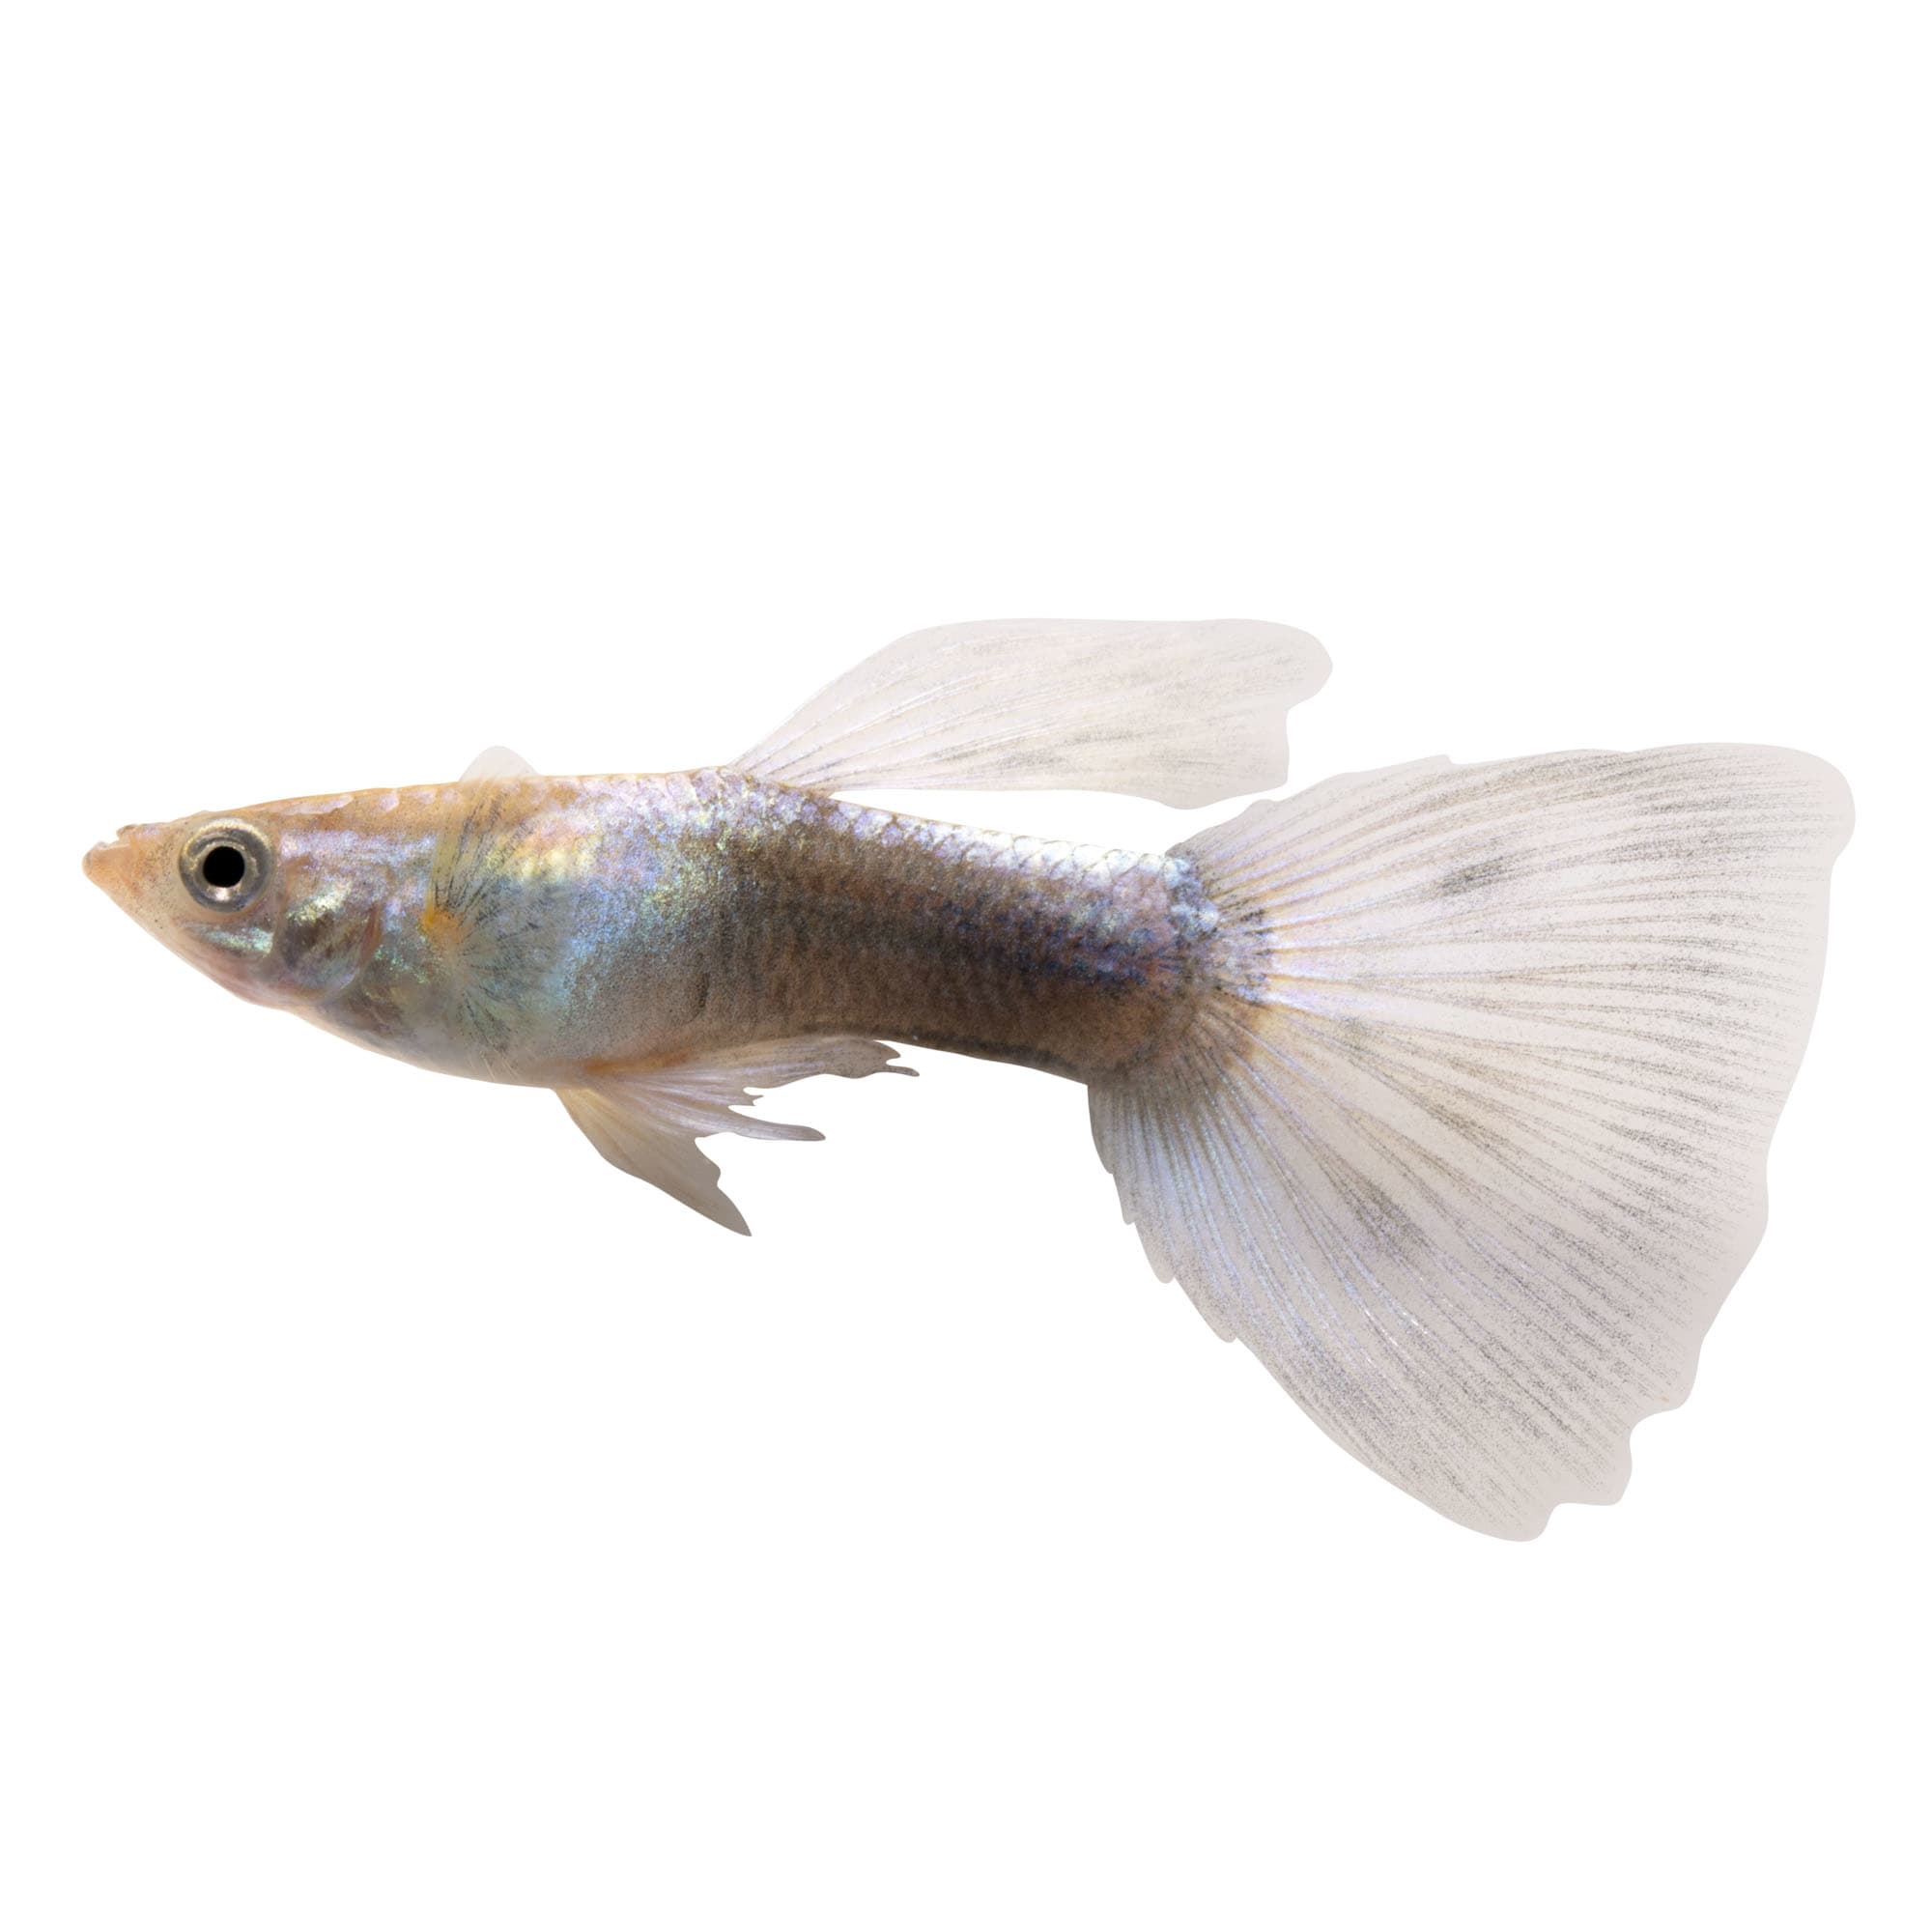 Assorted Male Fancy Guppies for Sale: Order Online